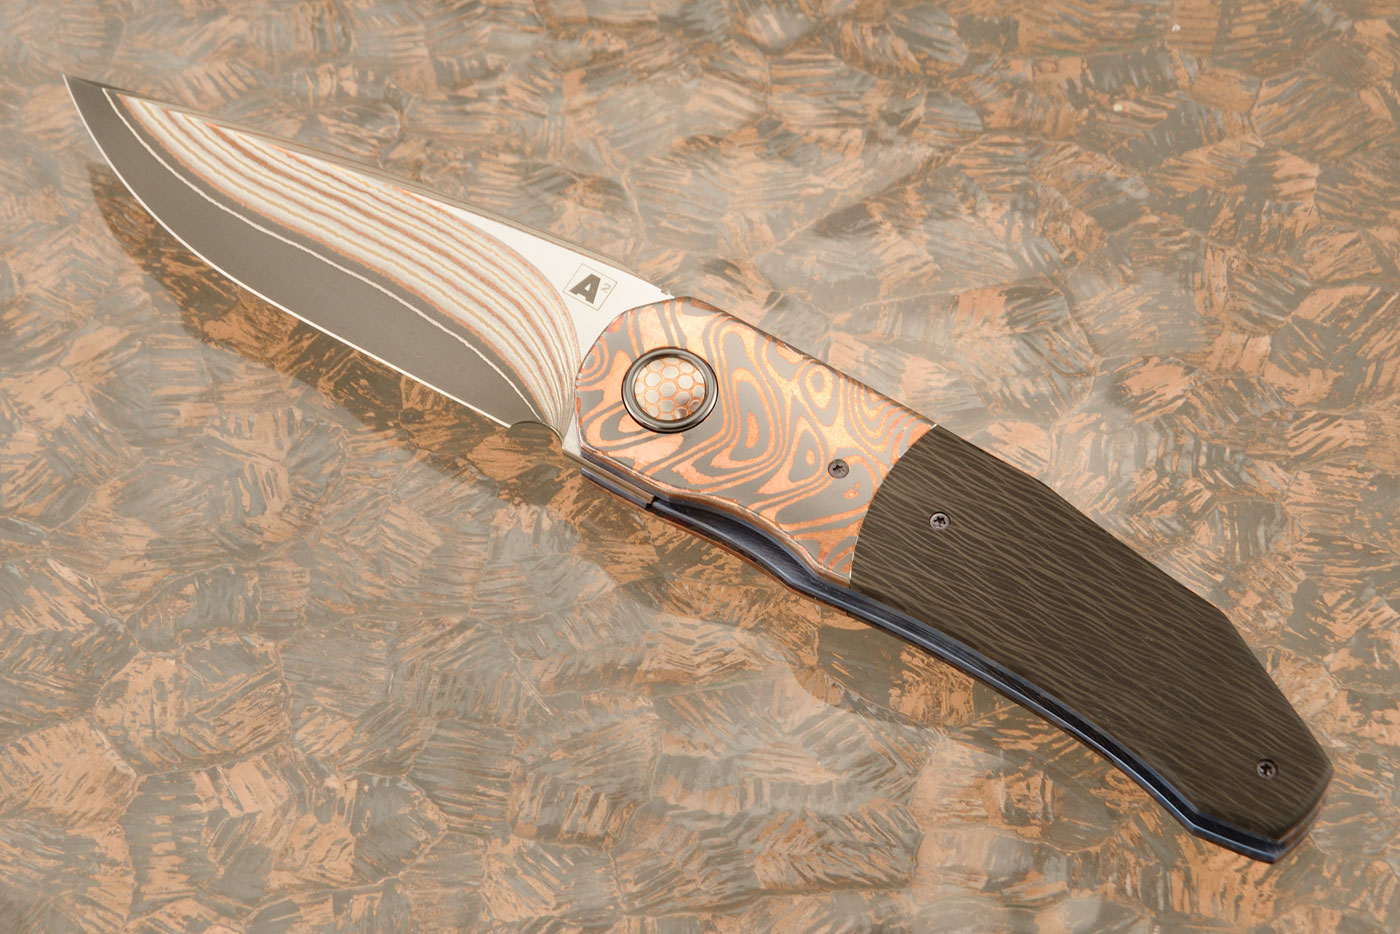 A9 Dress Front Flipper with Blackwood Carbon Fiber, Zirconium and Super Conductor (Ceramic IKBS) - Stainless Yu-Shoku